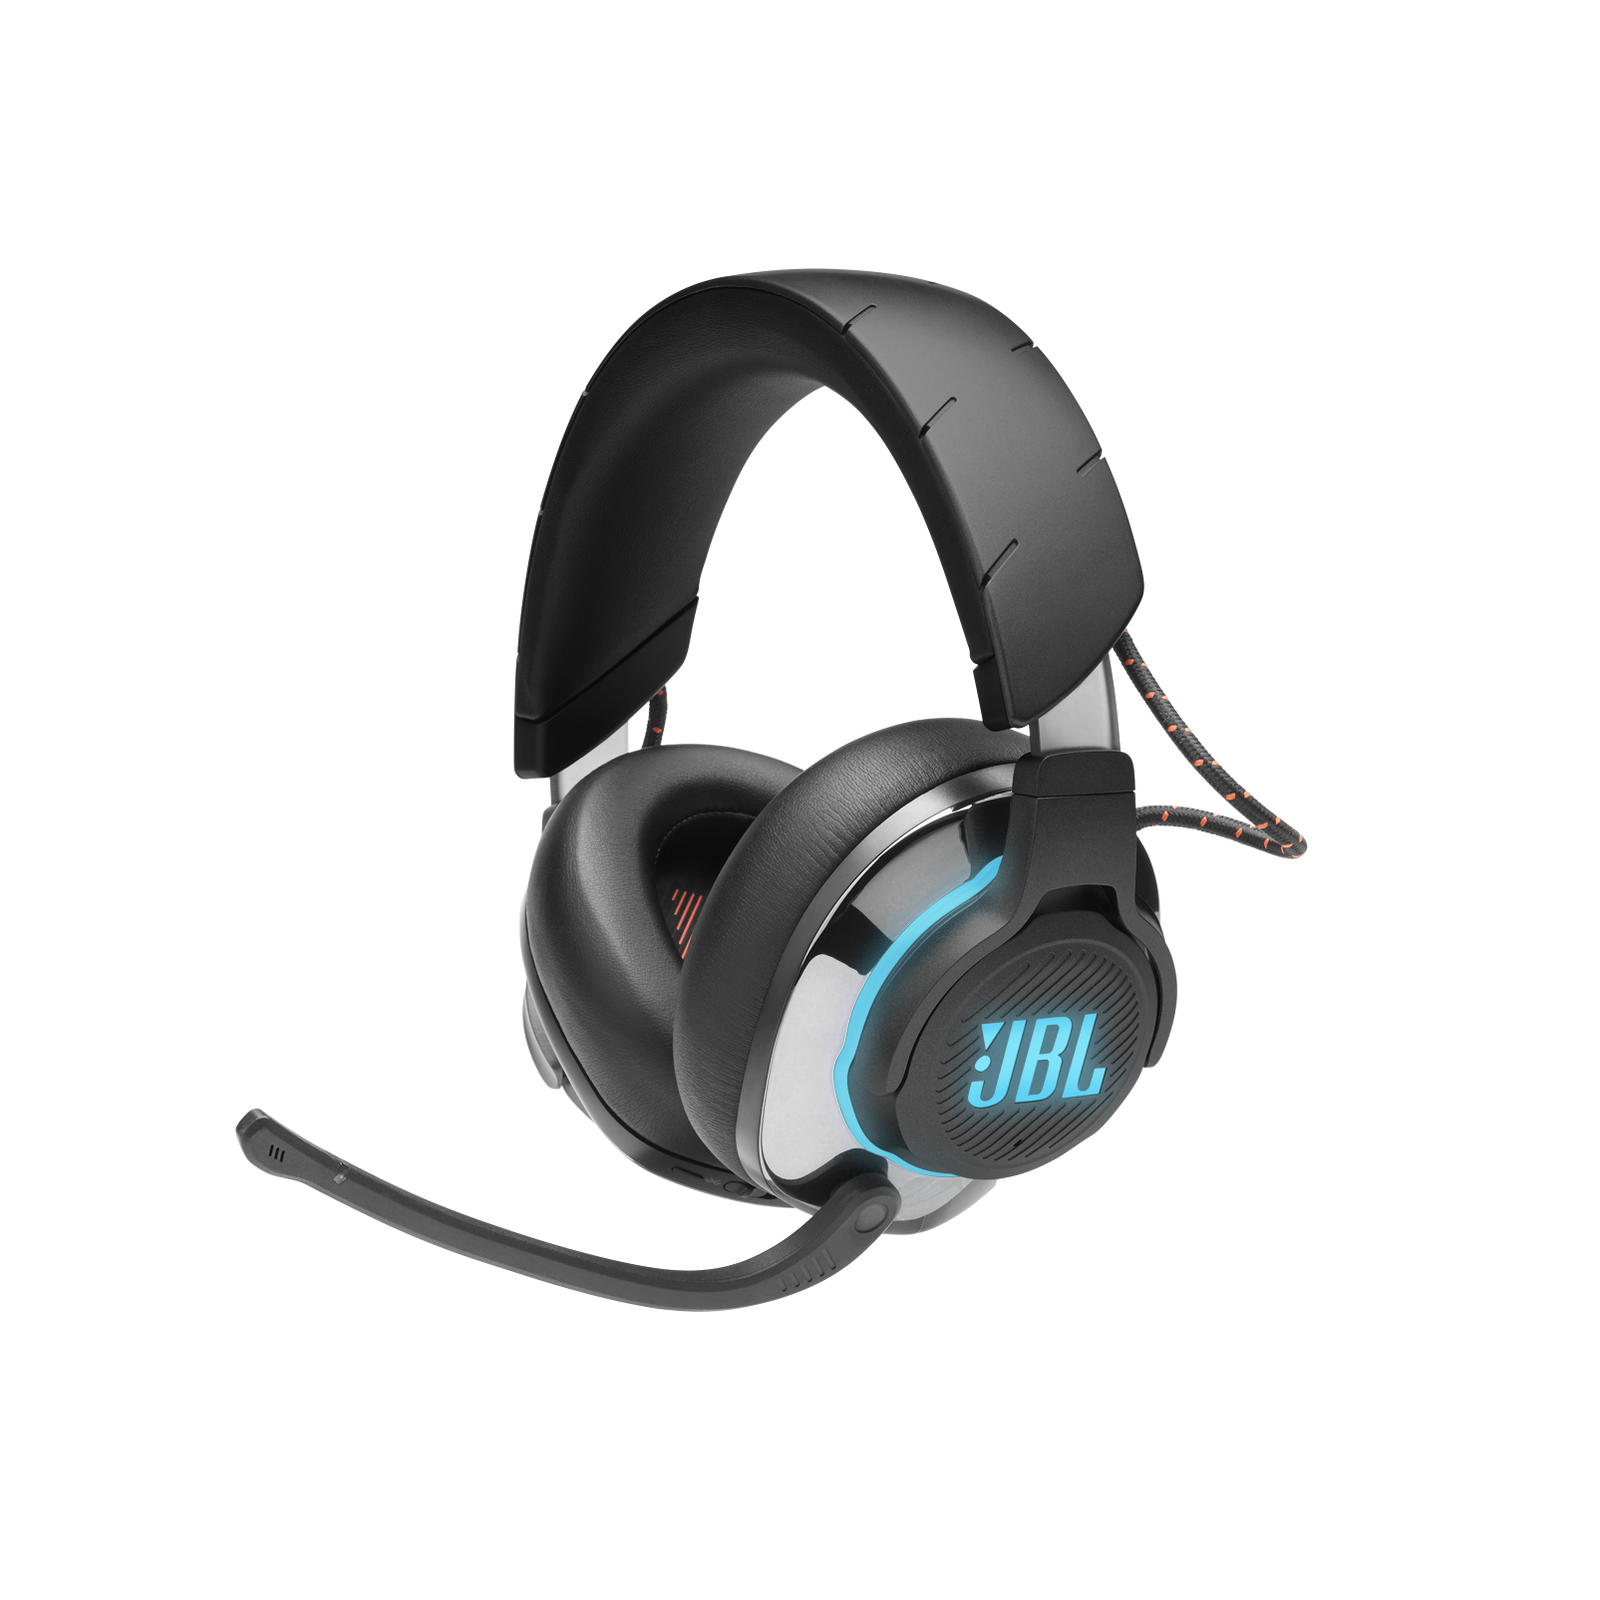 JBL Quantum 810 Black | Over-Ear BT Wireless Gaming Headset - JBL 9.1 Surround Sound & Active Noise-Cancellation - PS5/XBOX One/Switch/PC Compatible Gaming Headset REFURBISHED